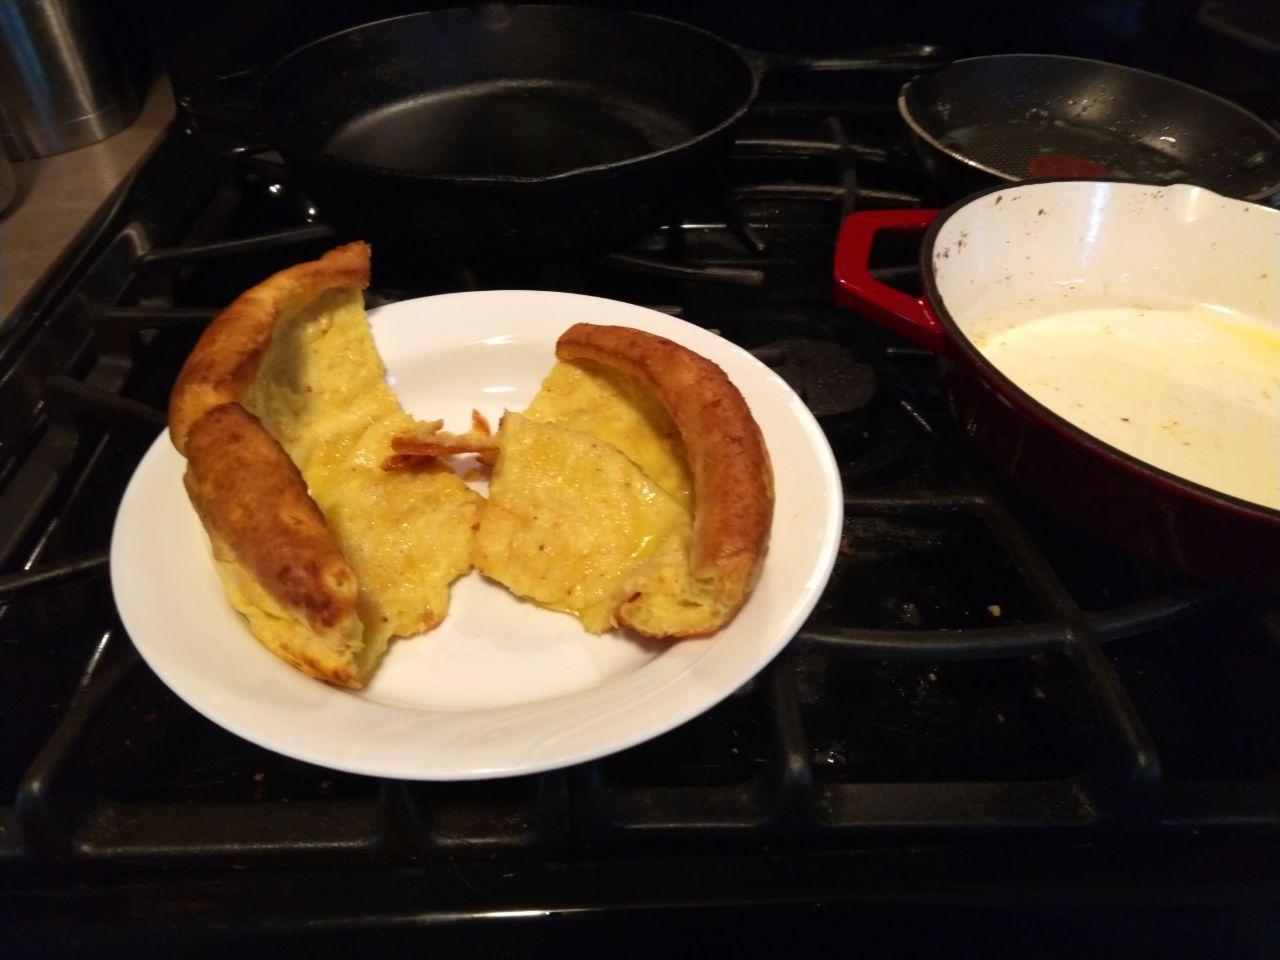 Two quarters of a dutch baby.